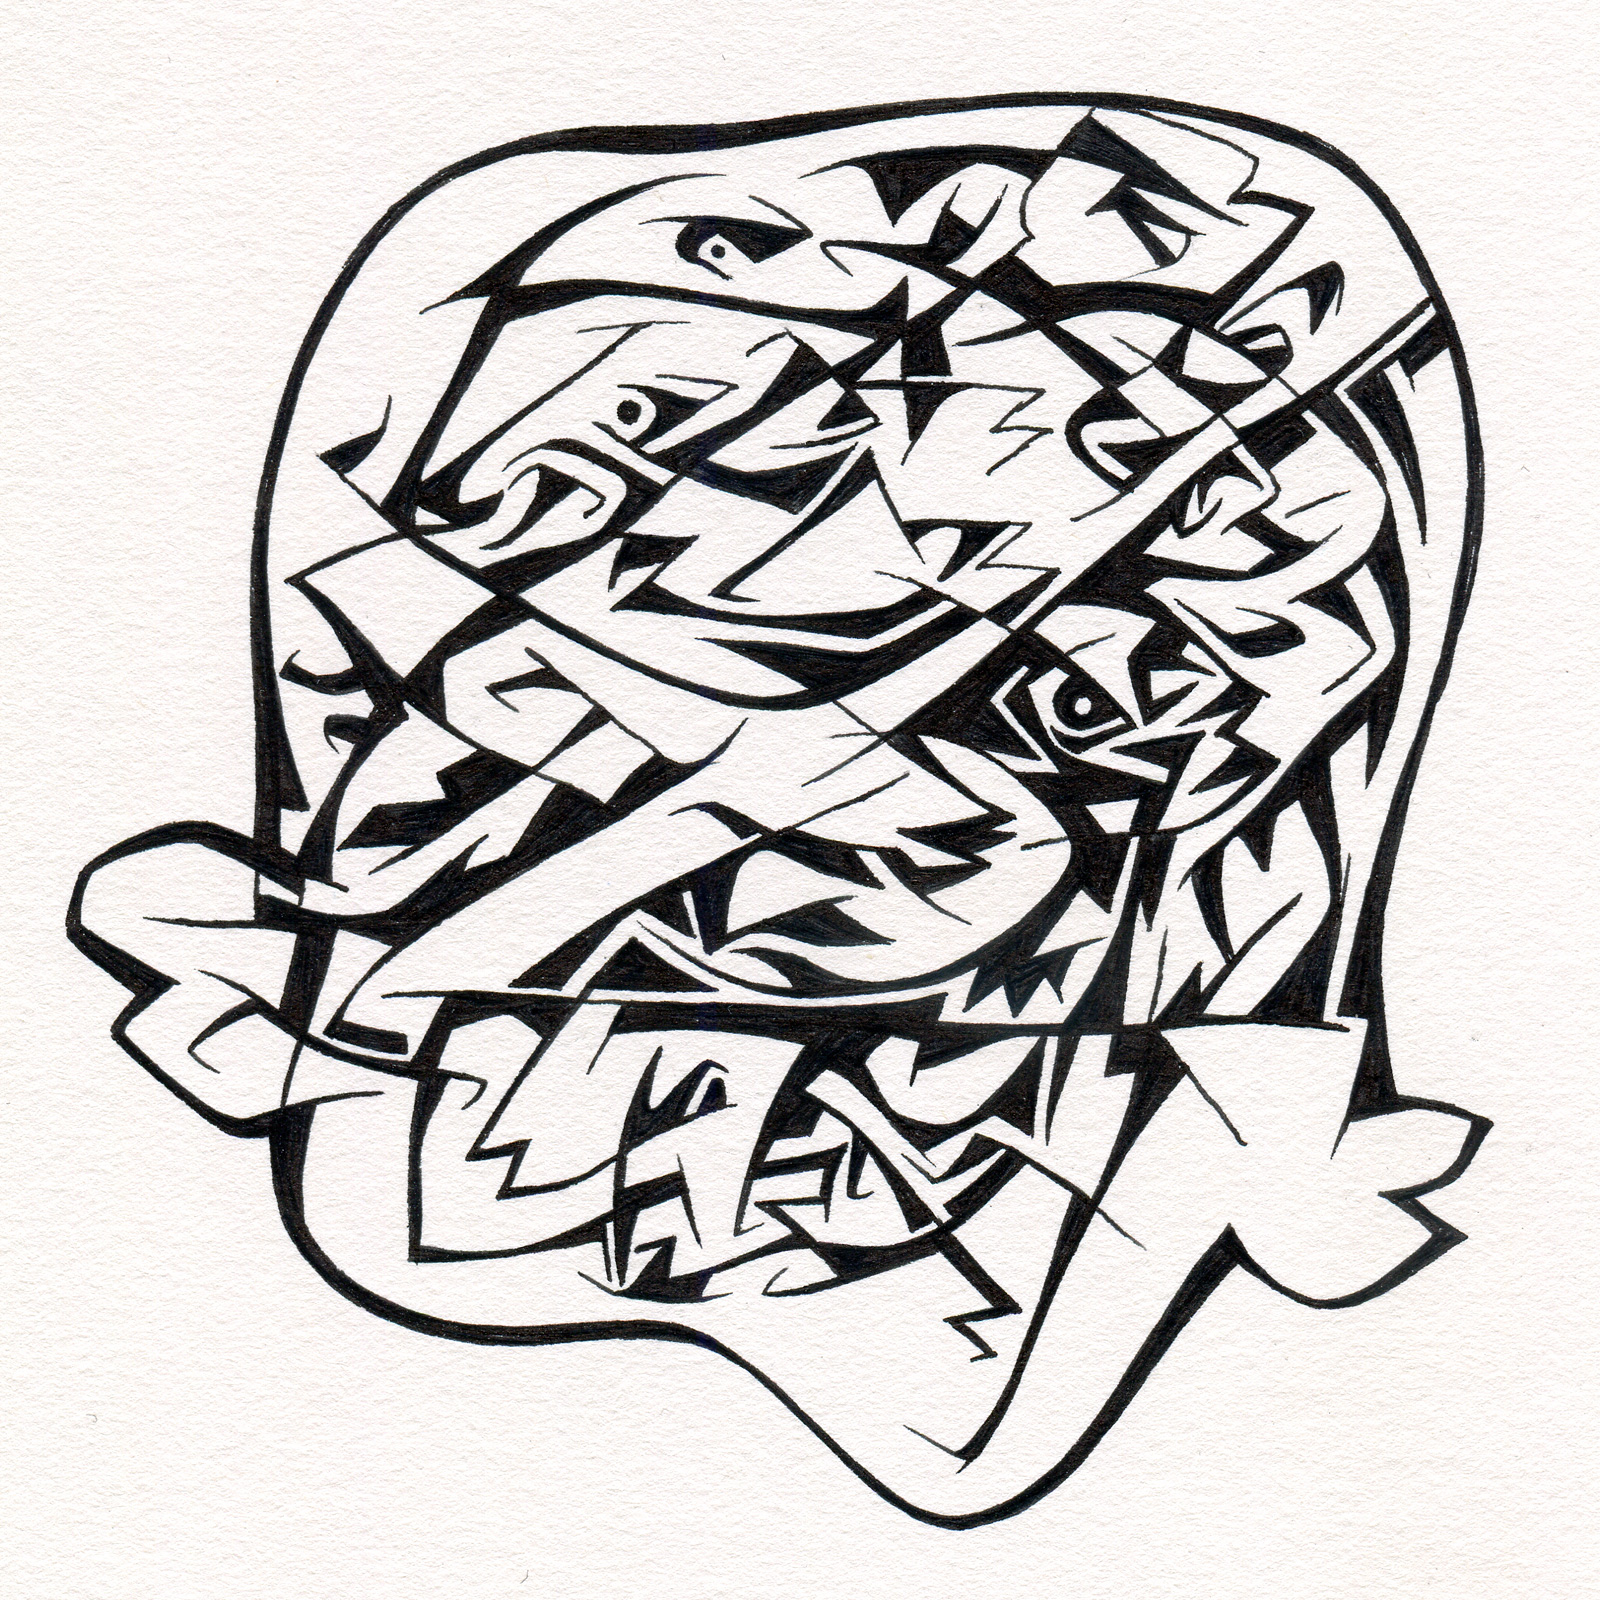   Untitled Ink Drawing #105 , 2015. Ink on paper. Approximately 5" x 5". 